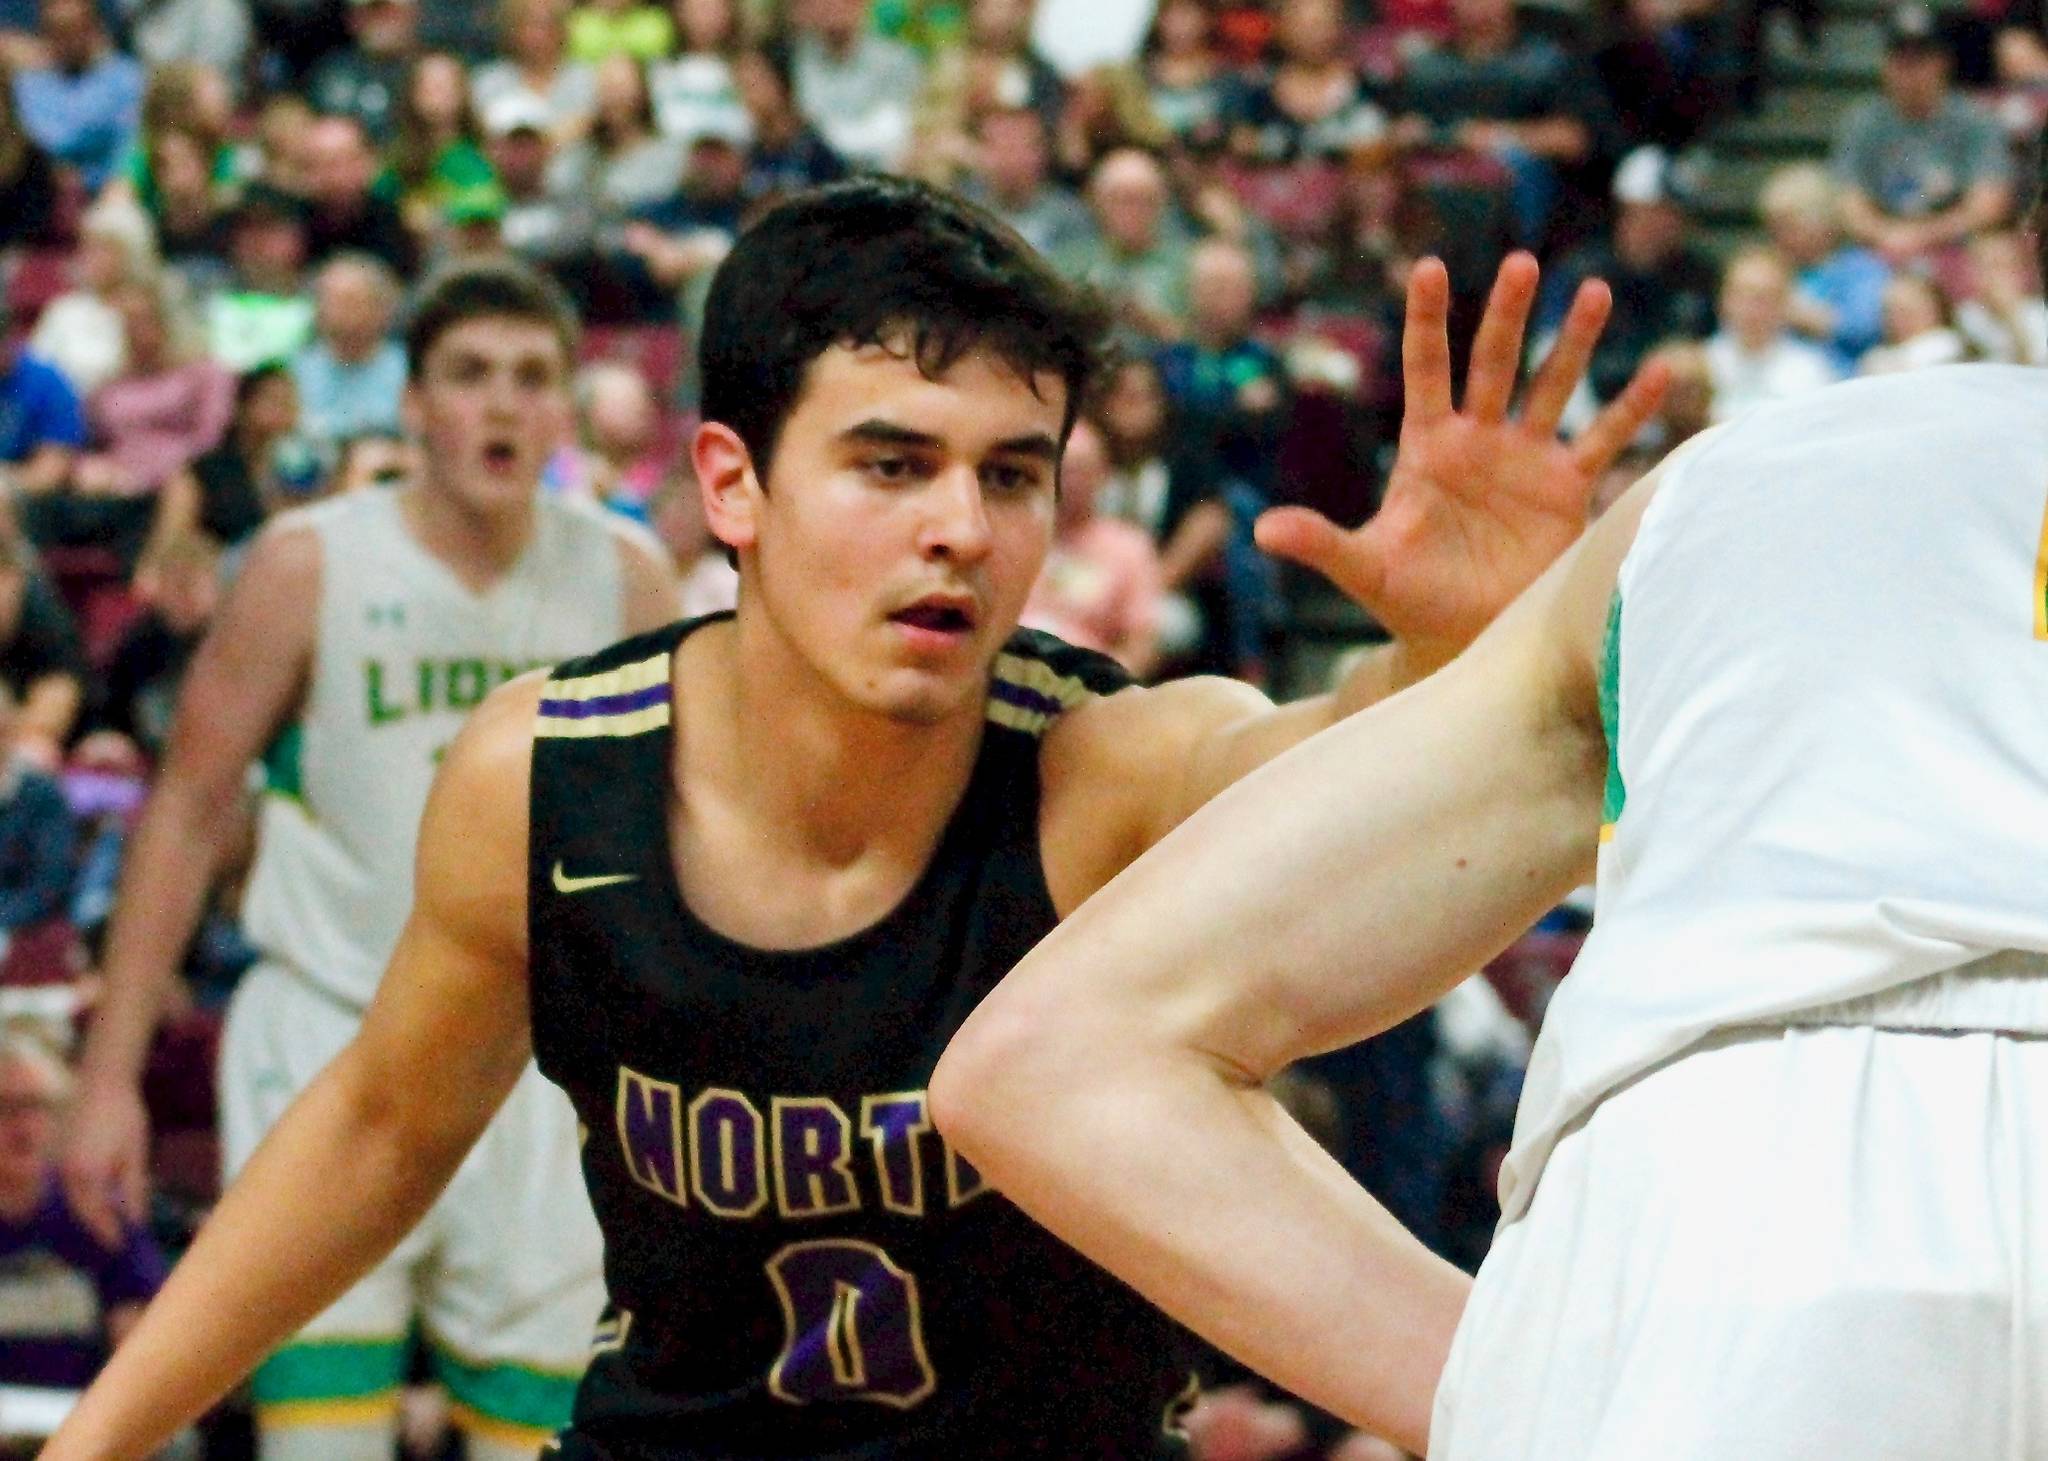 Johny Olmsted squares up to defend Lynden’s Jordan Medcalf in North Kitsap’s semifinal win over No. 1 Lynden. (Mark Krulish/Kitsap News Group)